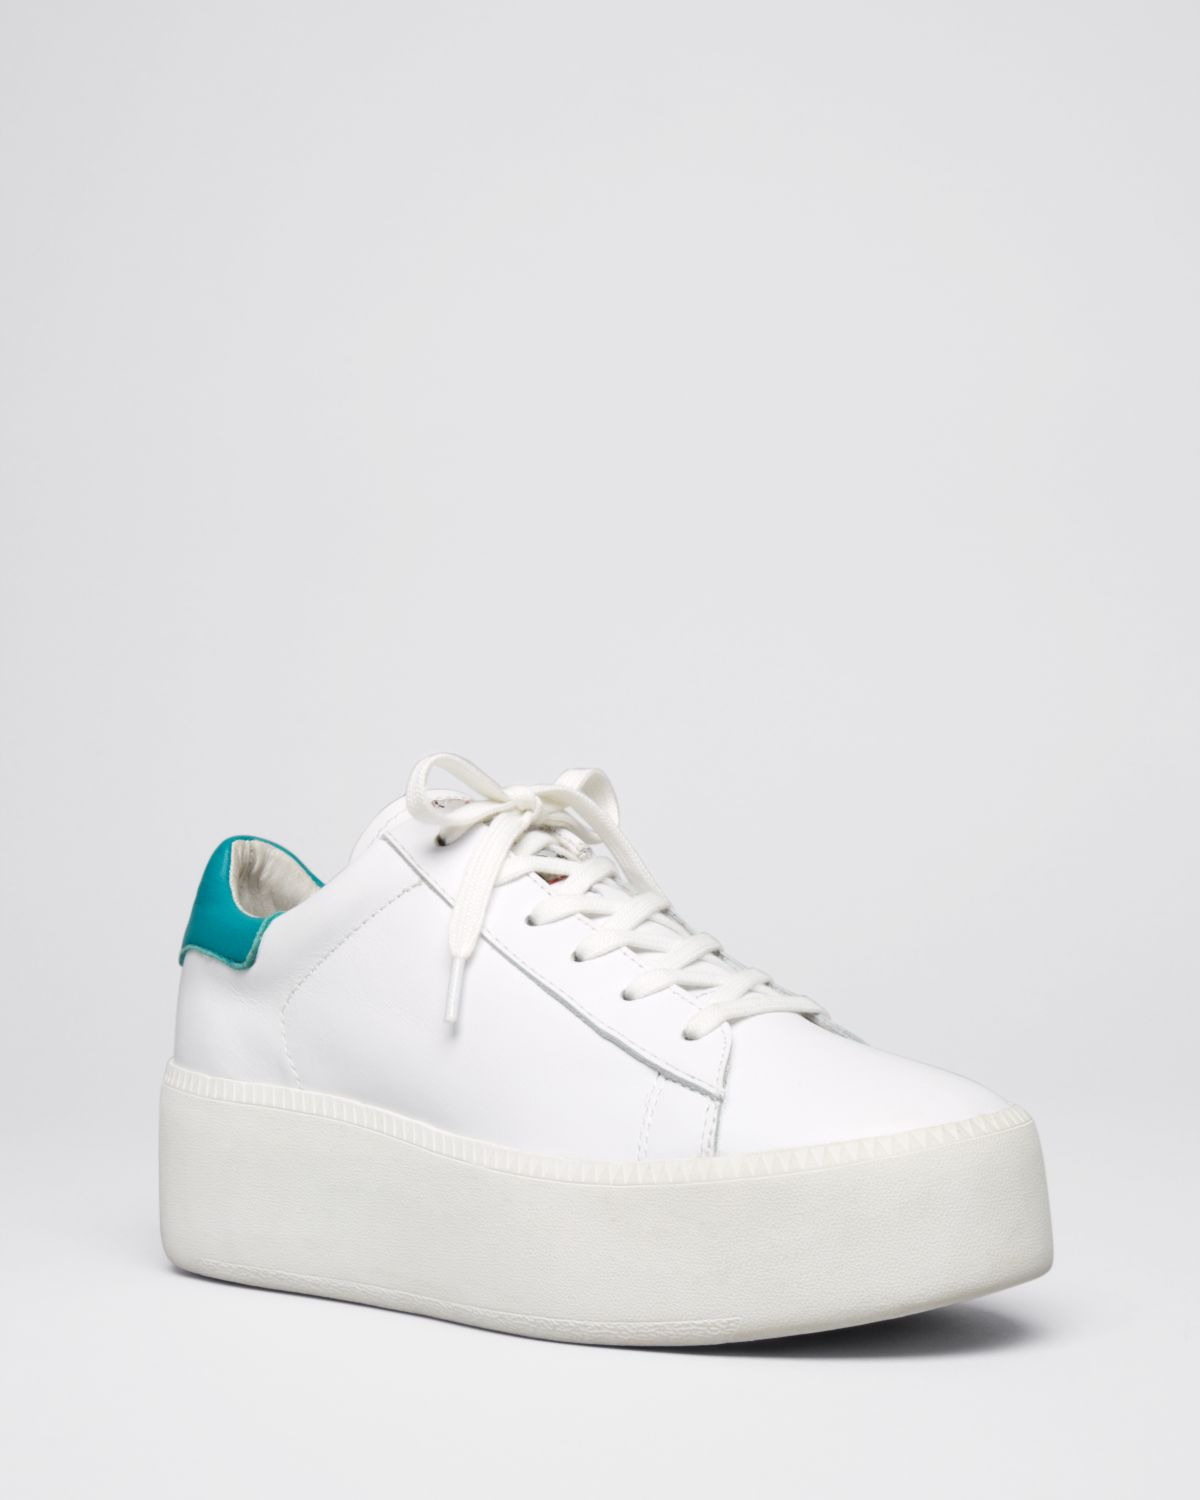 Ash Platform Lace Up Sneakers - Cult in 